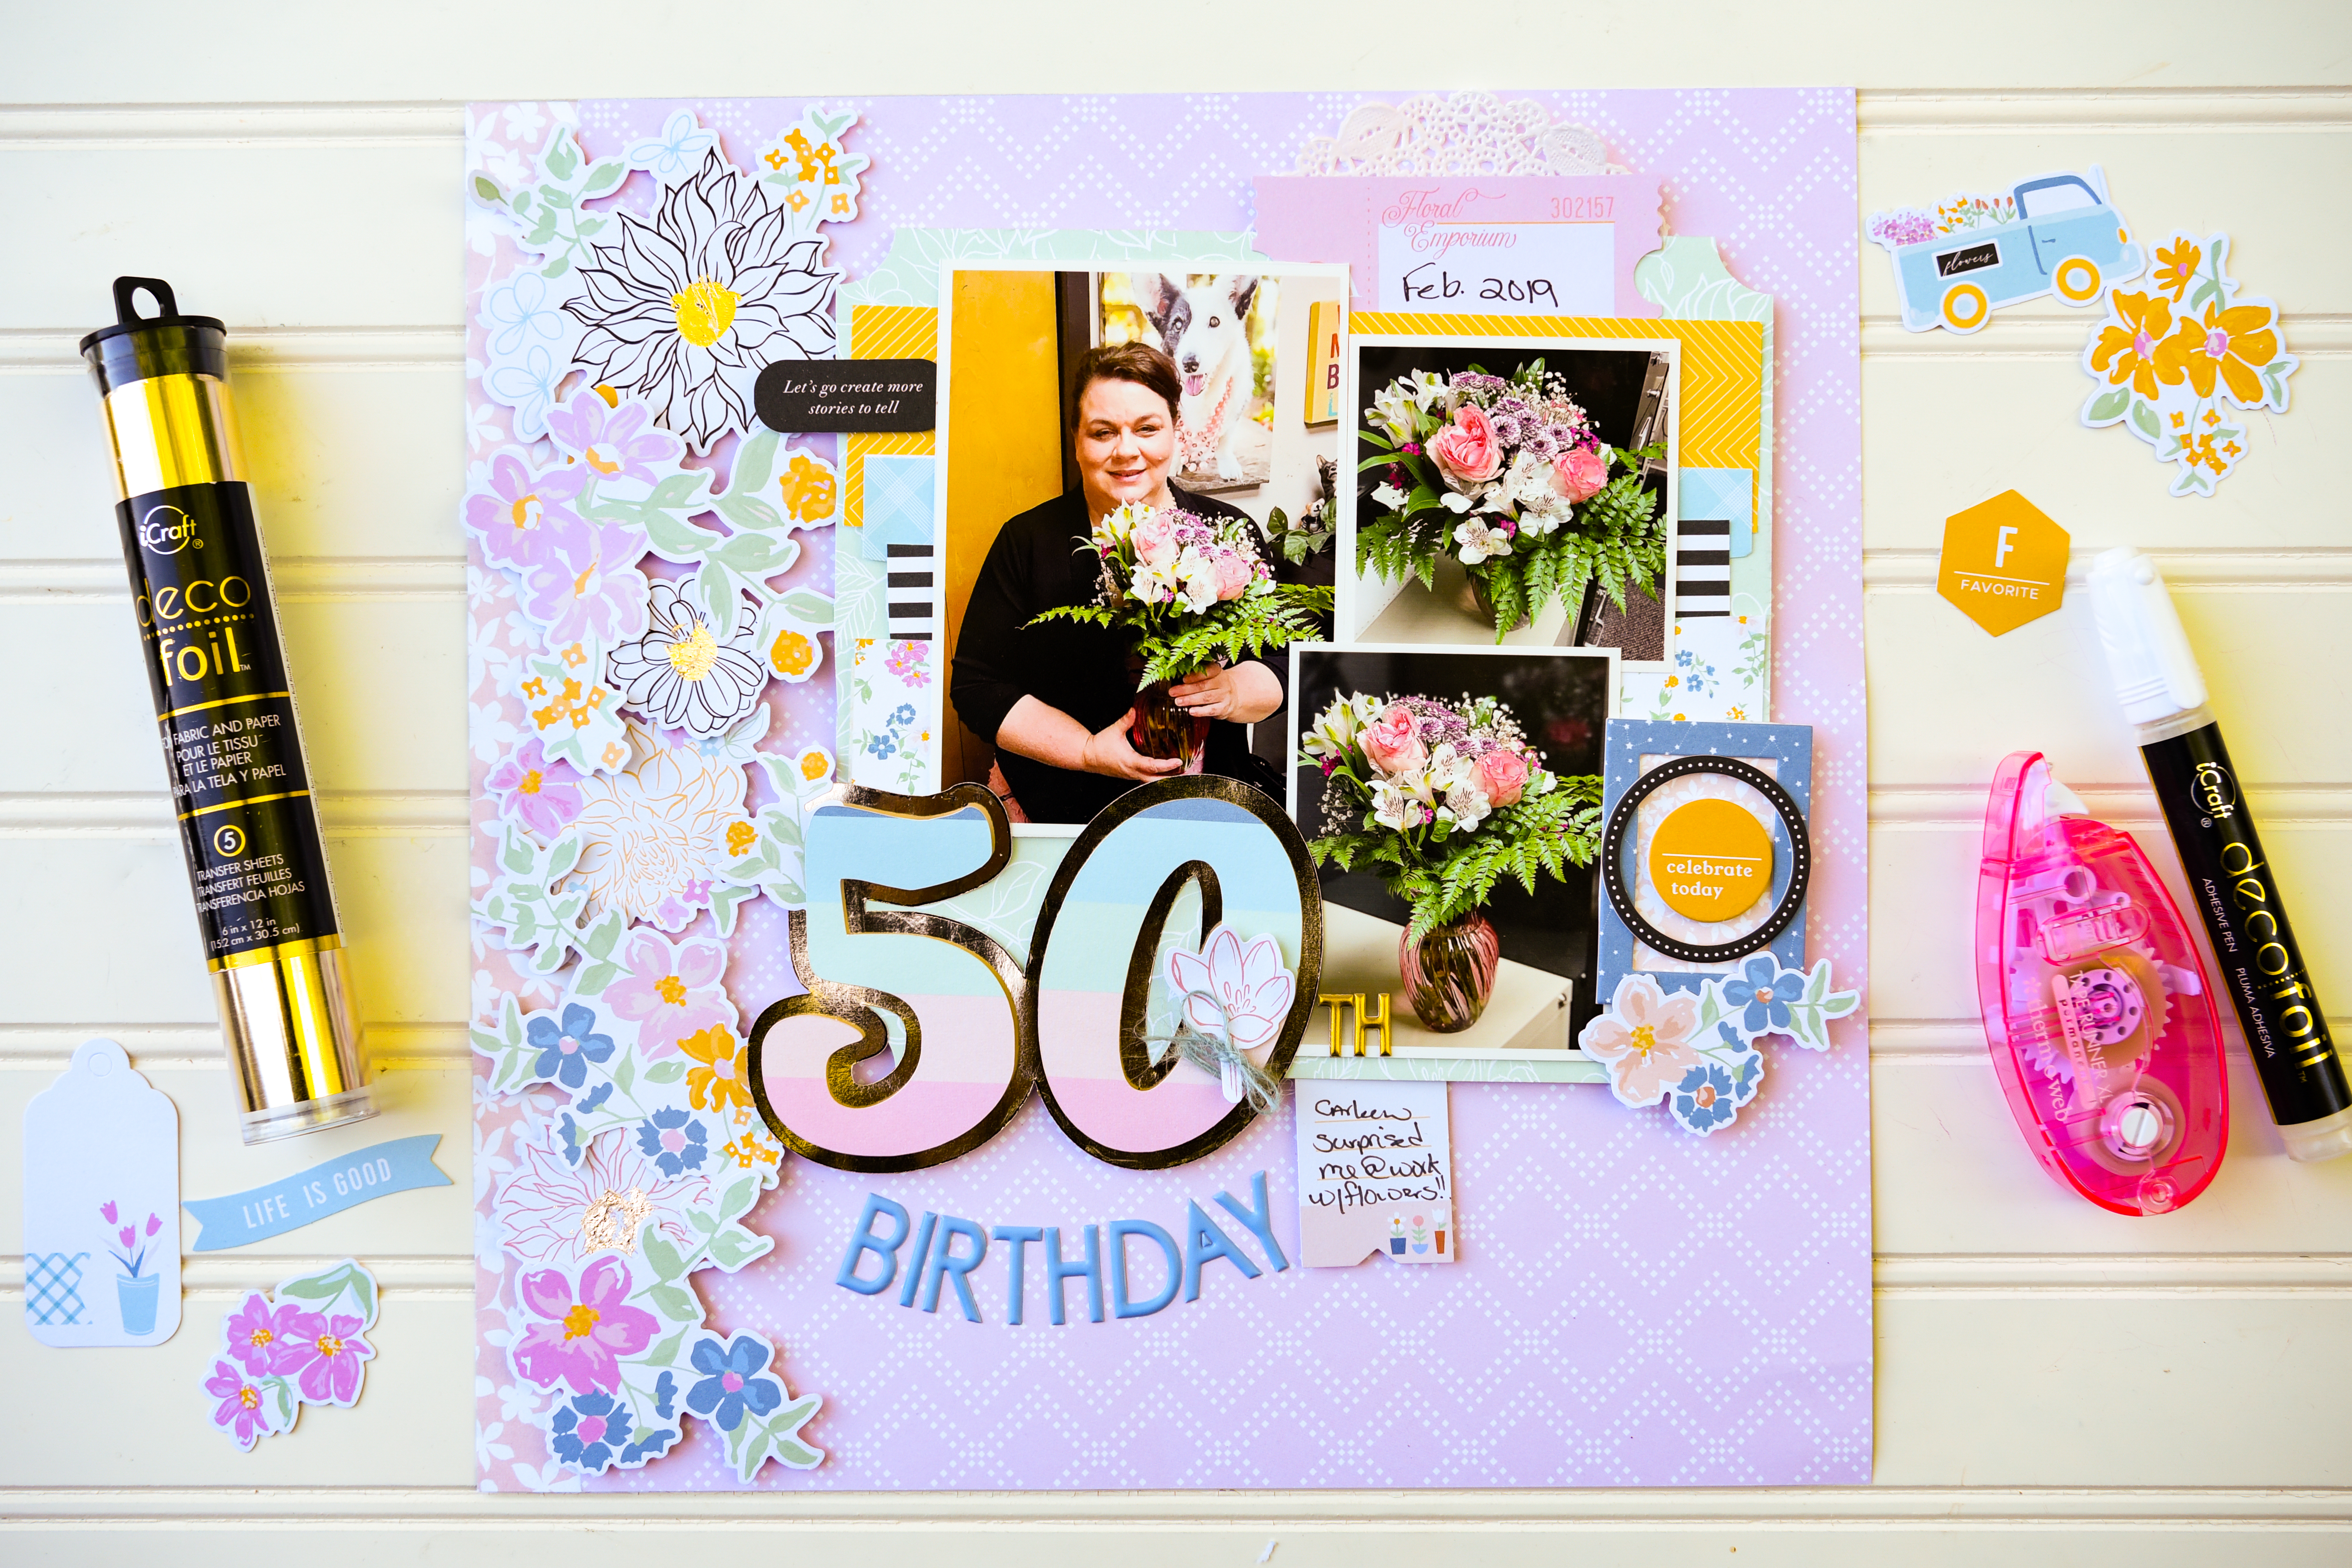 GLAM FS 50th Birthday Scrapbook Layout with Deco Foil Accents by Katrina Hunt